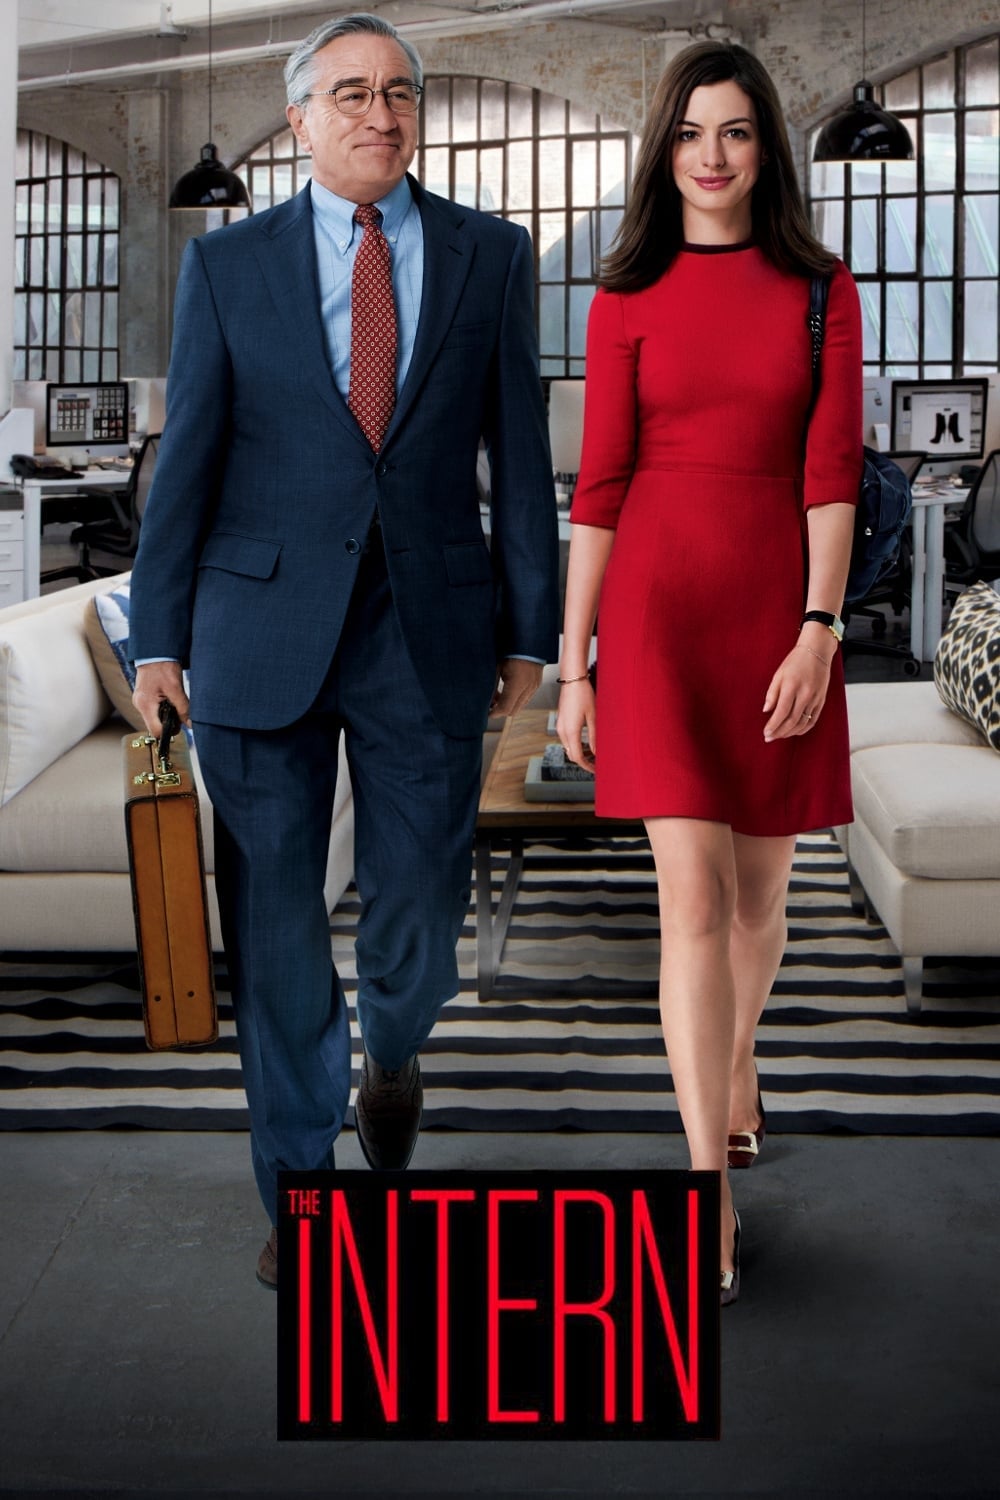 the intern movie review essay